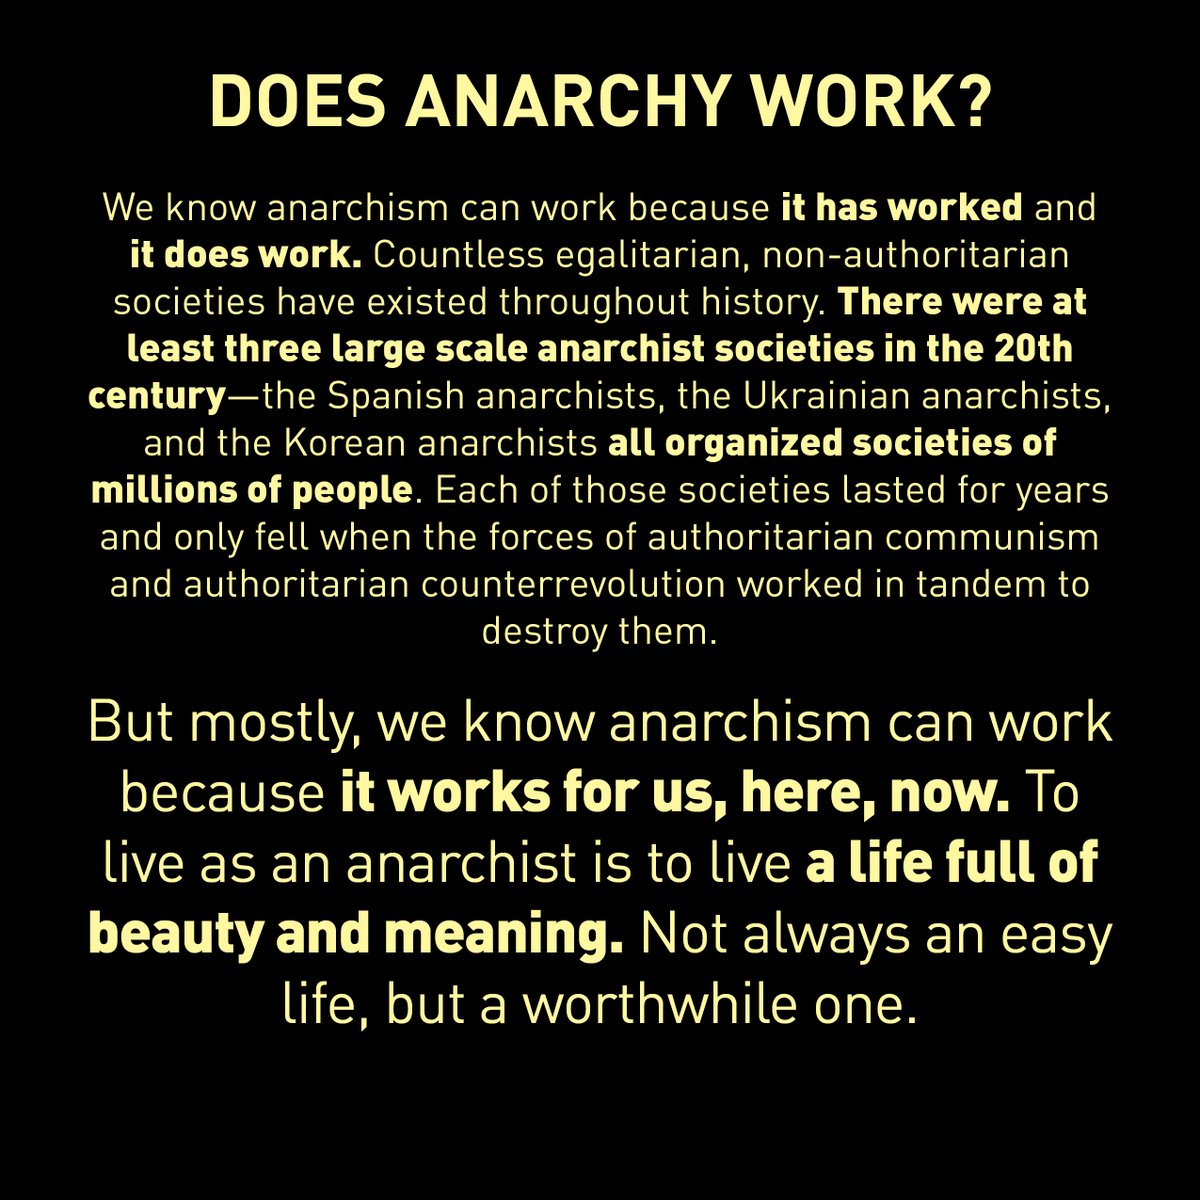 Just Who Are These Anarchists?(reposted from Black Powder Press on Instagram, an introduction to anarchism. I'll put the text from the slides in a long thread below the images.)